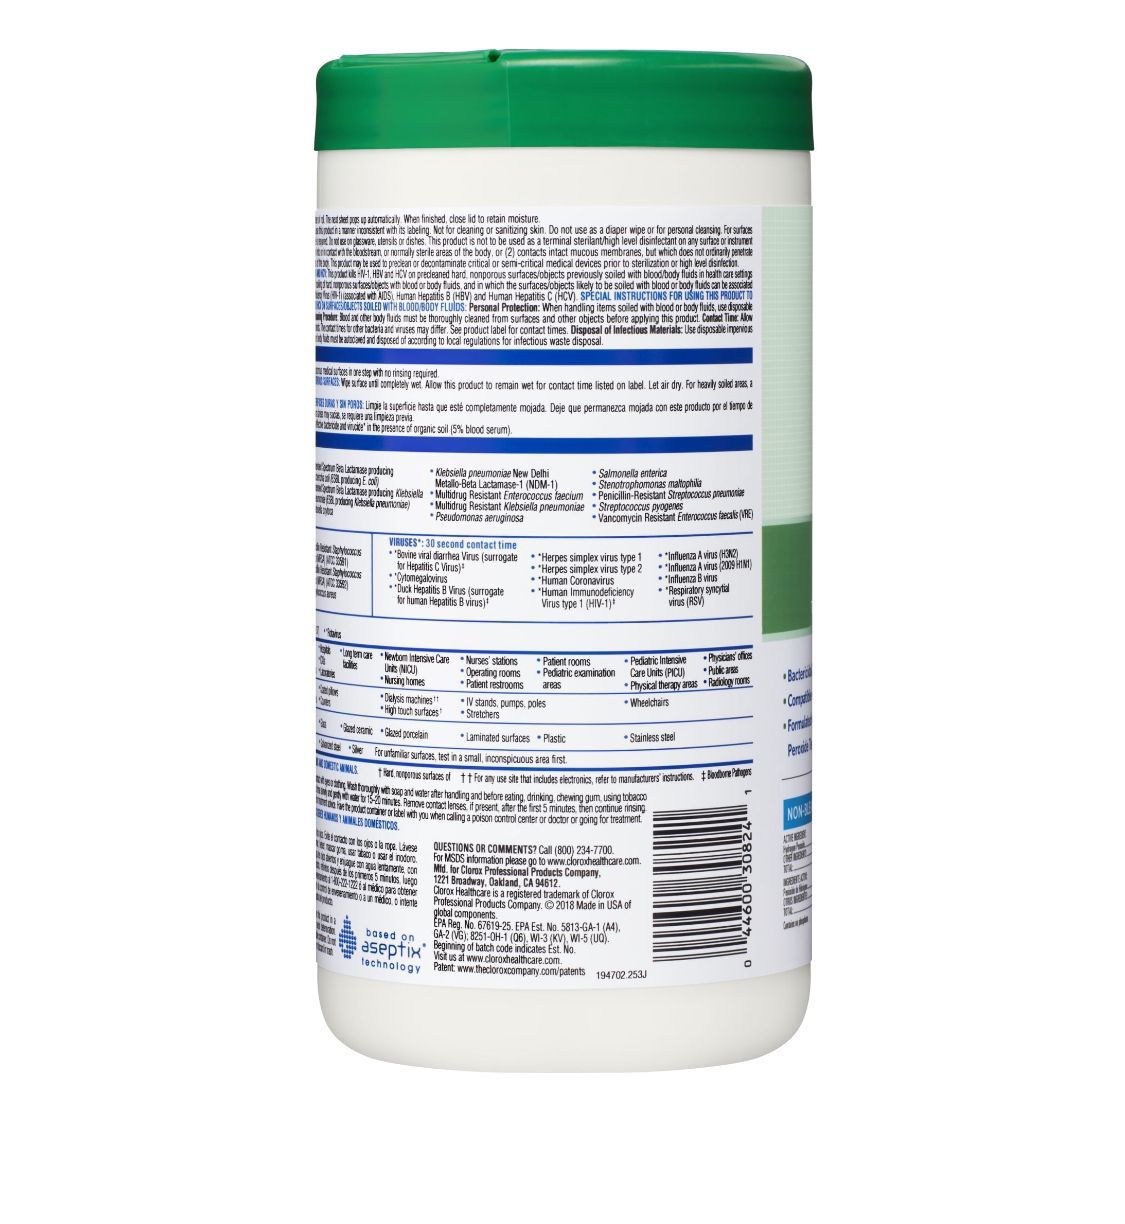 Clorox Healthcare Hydrogen Peroxide Cleaner Disinfectant Wipes - 95 Wipes$1.99